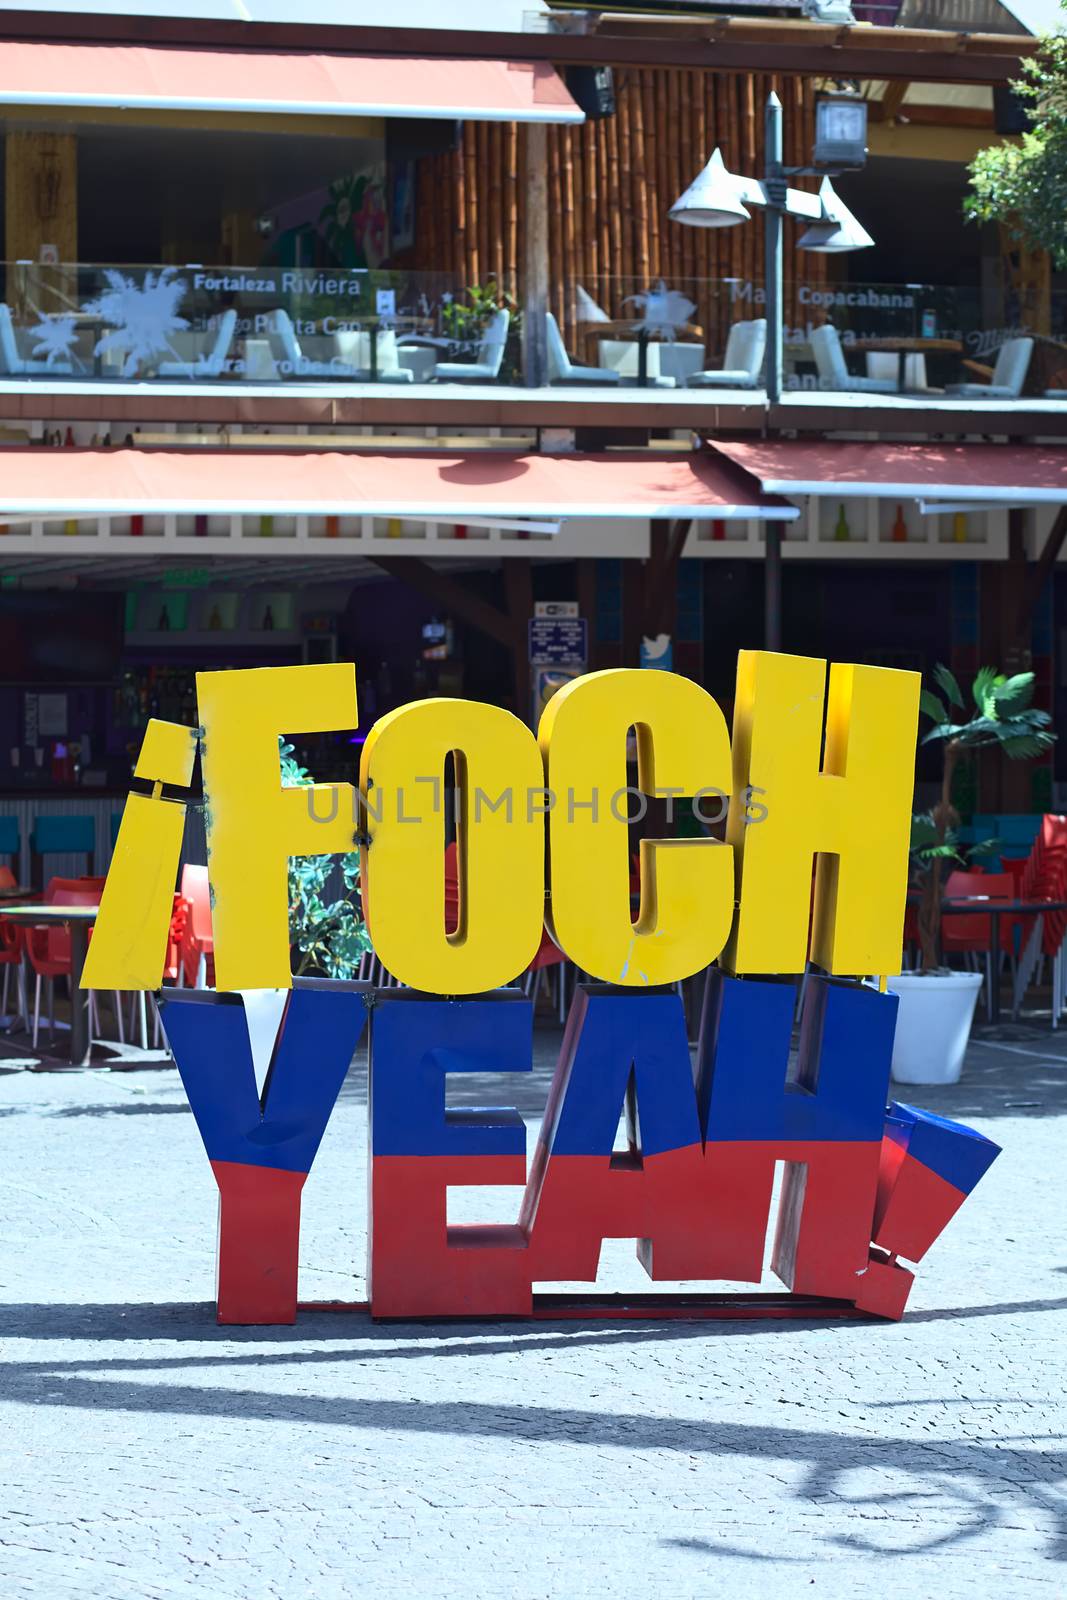 QUITO, ECUADOR - AUGUST 4, 2014: Foch Yeah sign in the Ecuadorian colors on Plaza Foch (Foch Square) at the intersection of Reina Victoria and Mariscal Foch Streets in the tourist district of La Mariscal on August 4, 2014 in Quito, Ecuador. On and around this square many restaurants, bars, cafes and hostels are located.